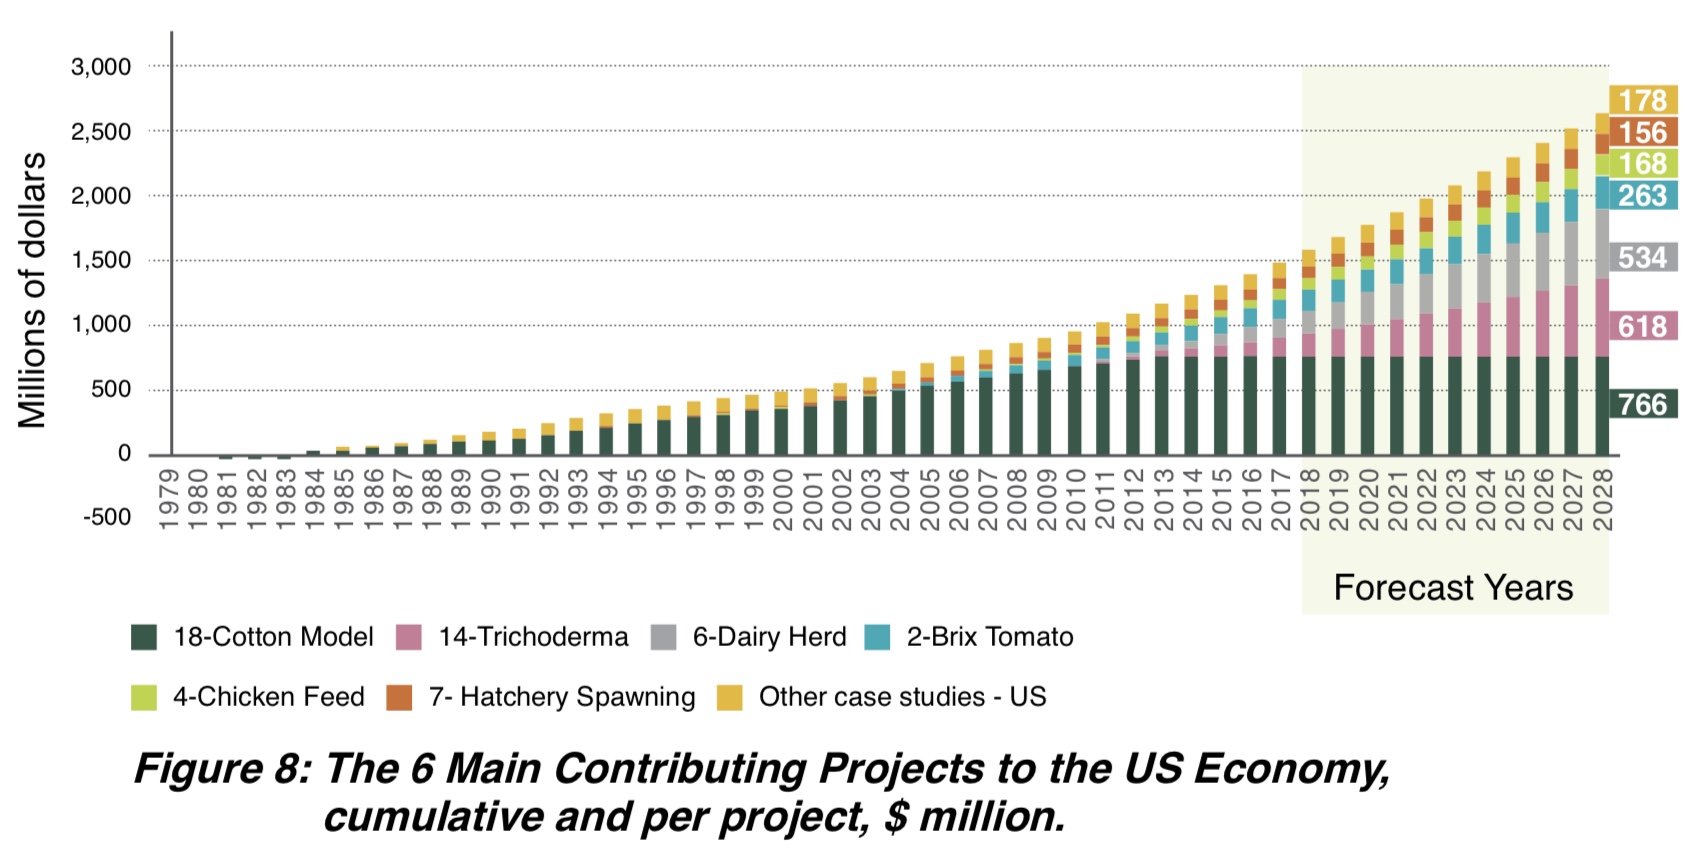 Figure 8: The 6 Main Contributing Projects to the US Economy, accumulated $ million